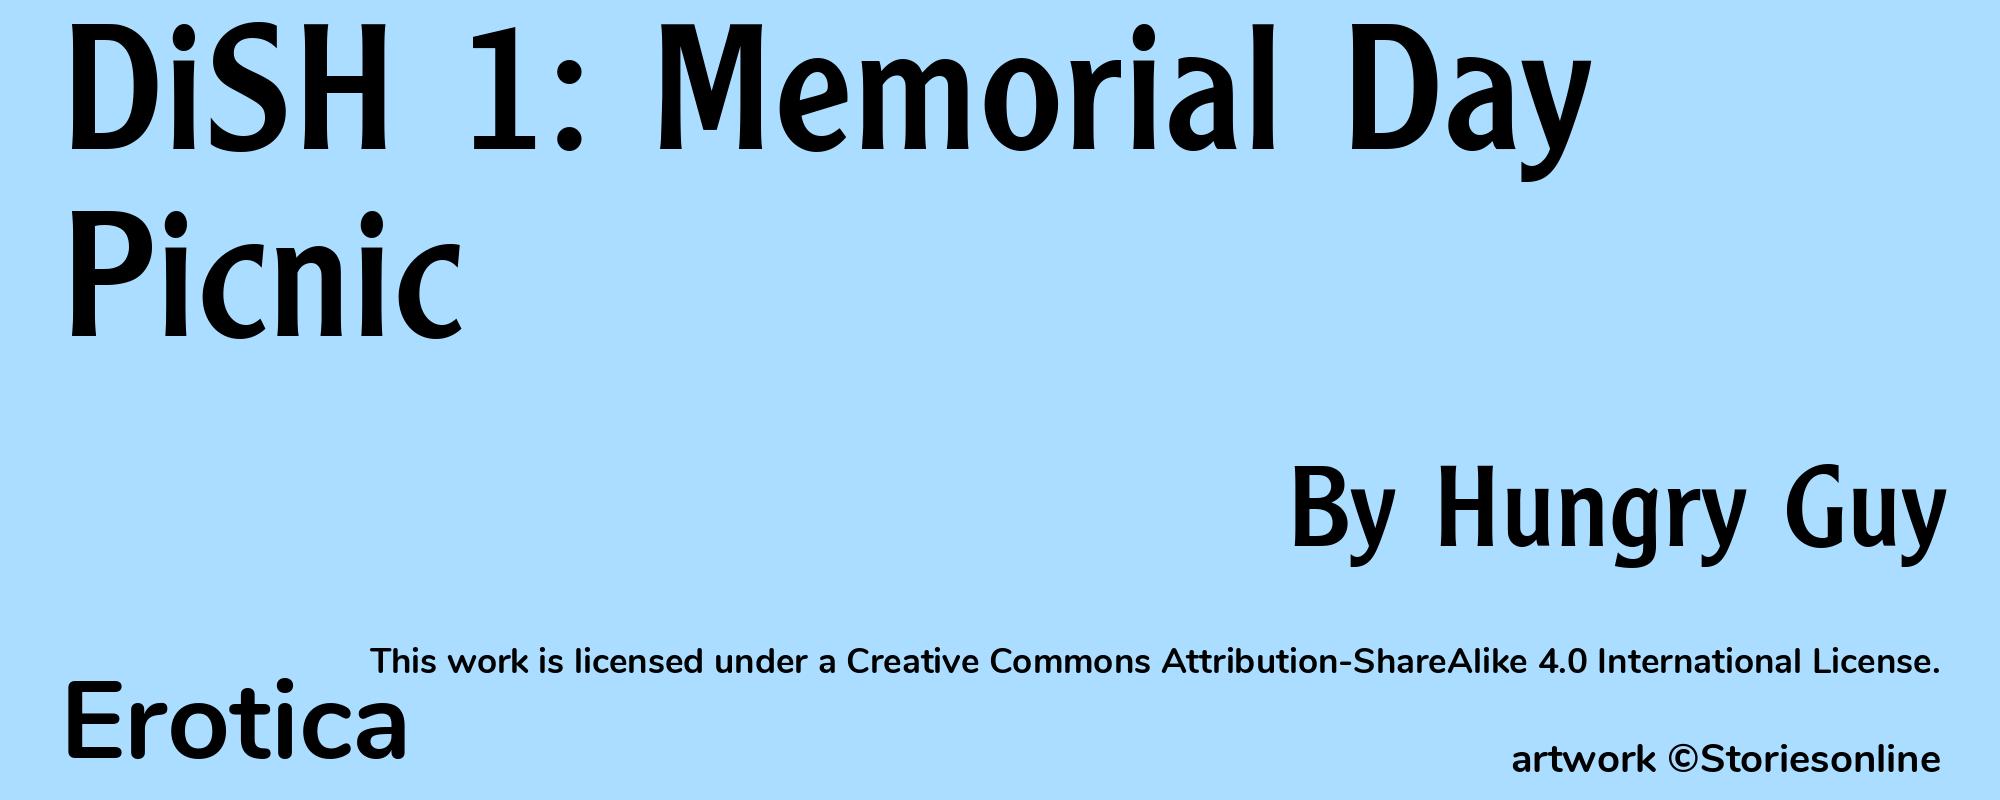 DiSH 1: Memorial Day Picnic - Cover